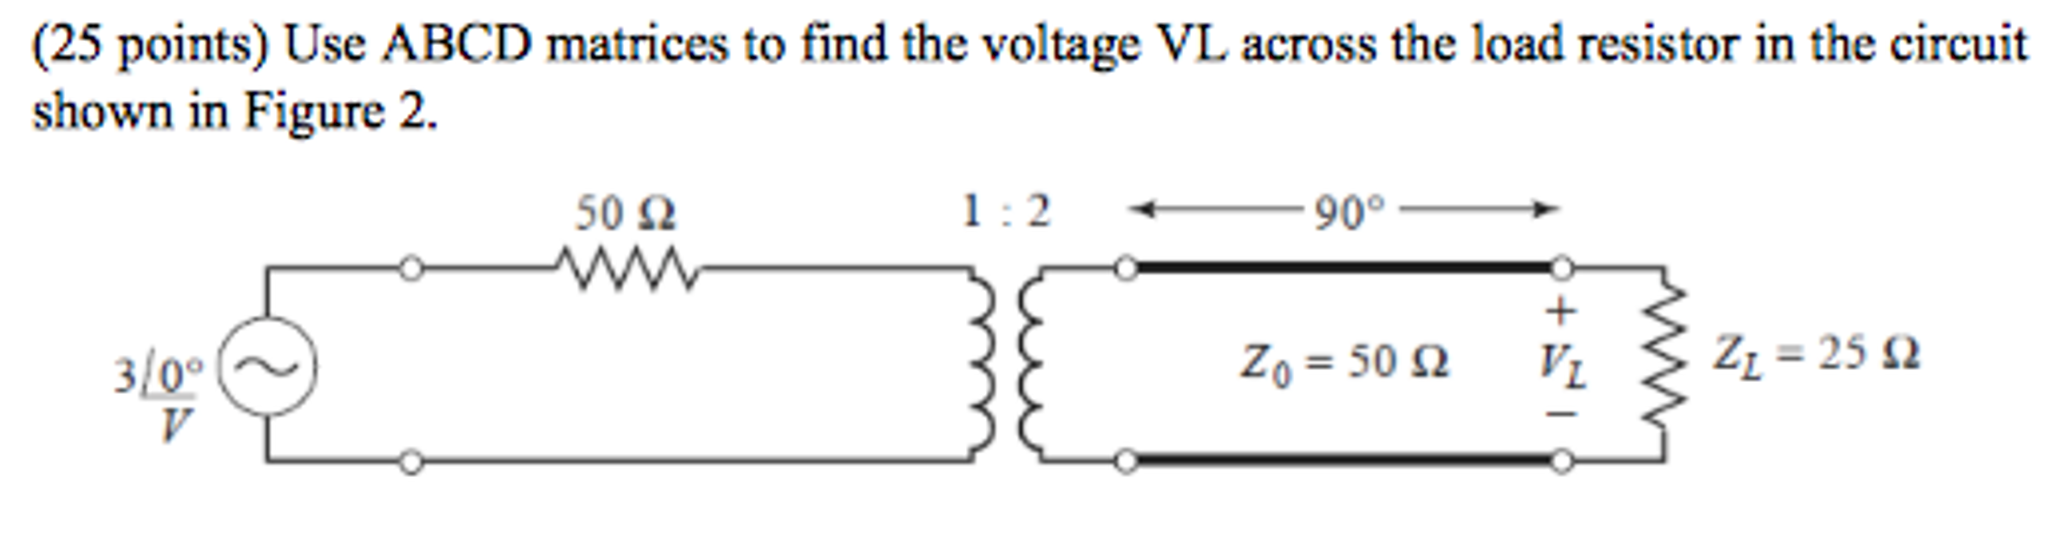 Use ABCD matrices to find the voltage VL across th